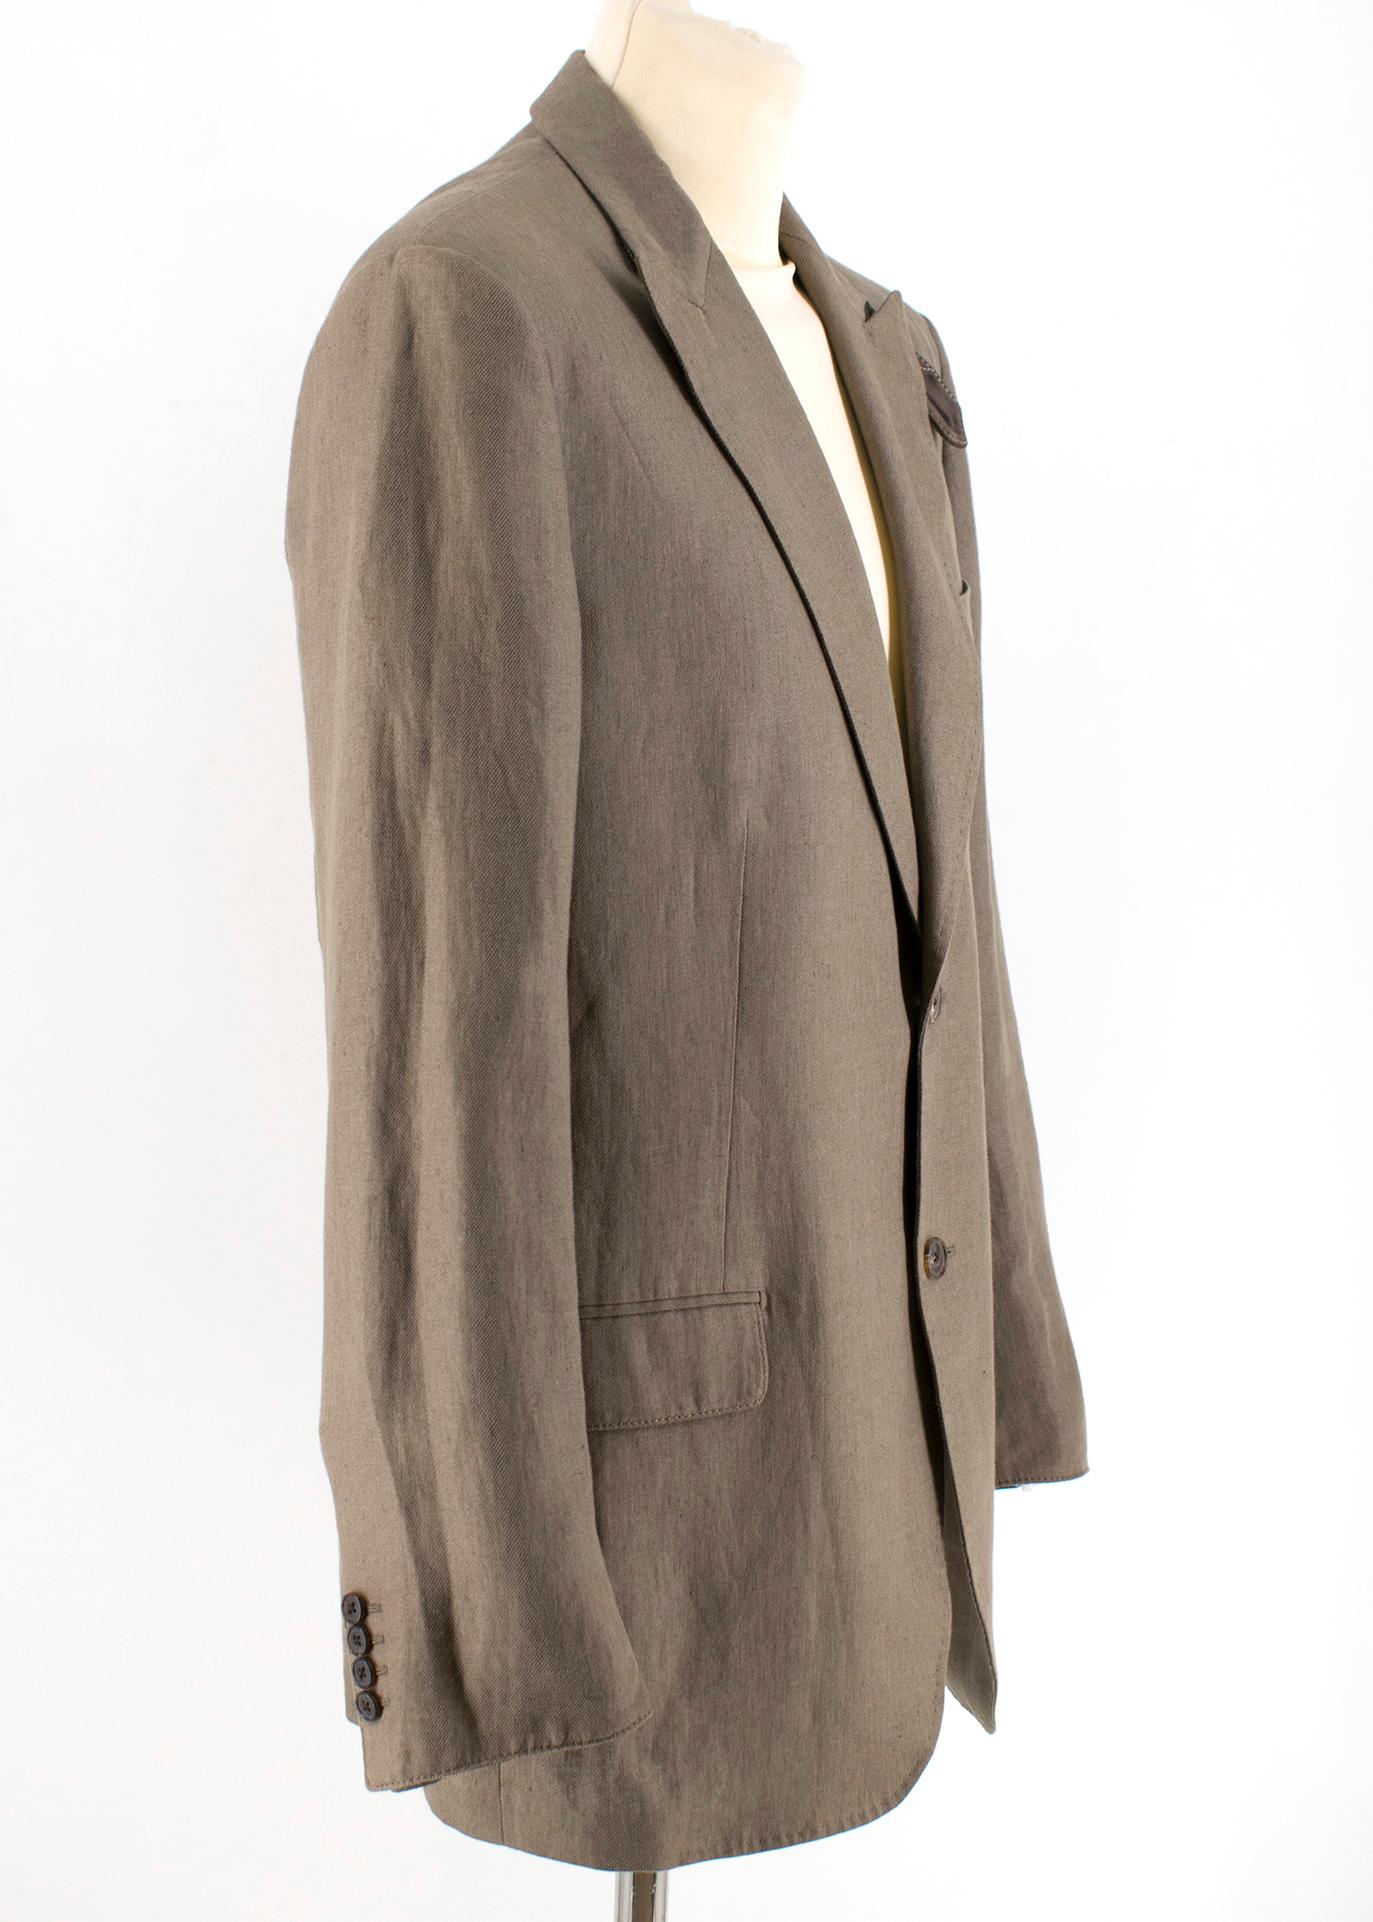 Hermes Olive Green Linen Blazer Jacket

button closure;
three-pocket style;
one interior pocket;
lining 100% rayon
Made in Italy

Please note, these items are pre-owned and may show signs of being stored even when unworn and unused. This is